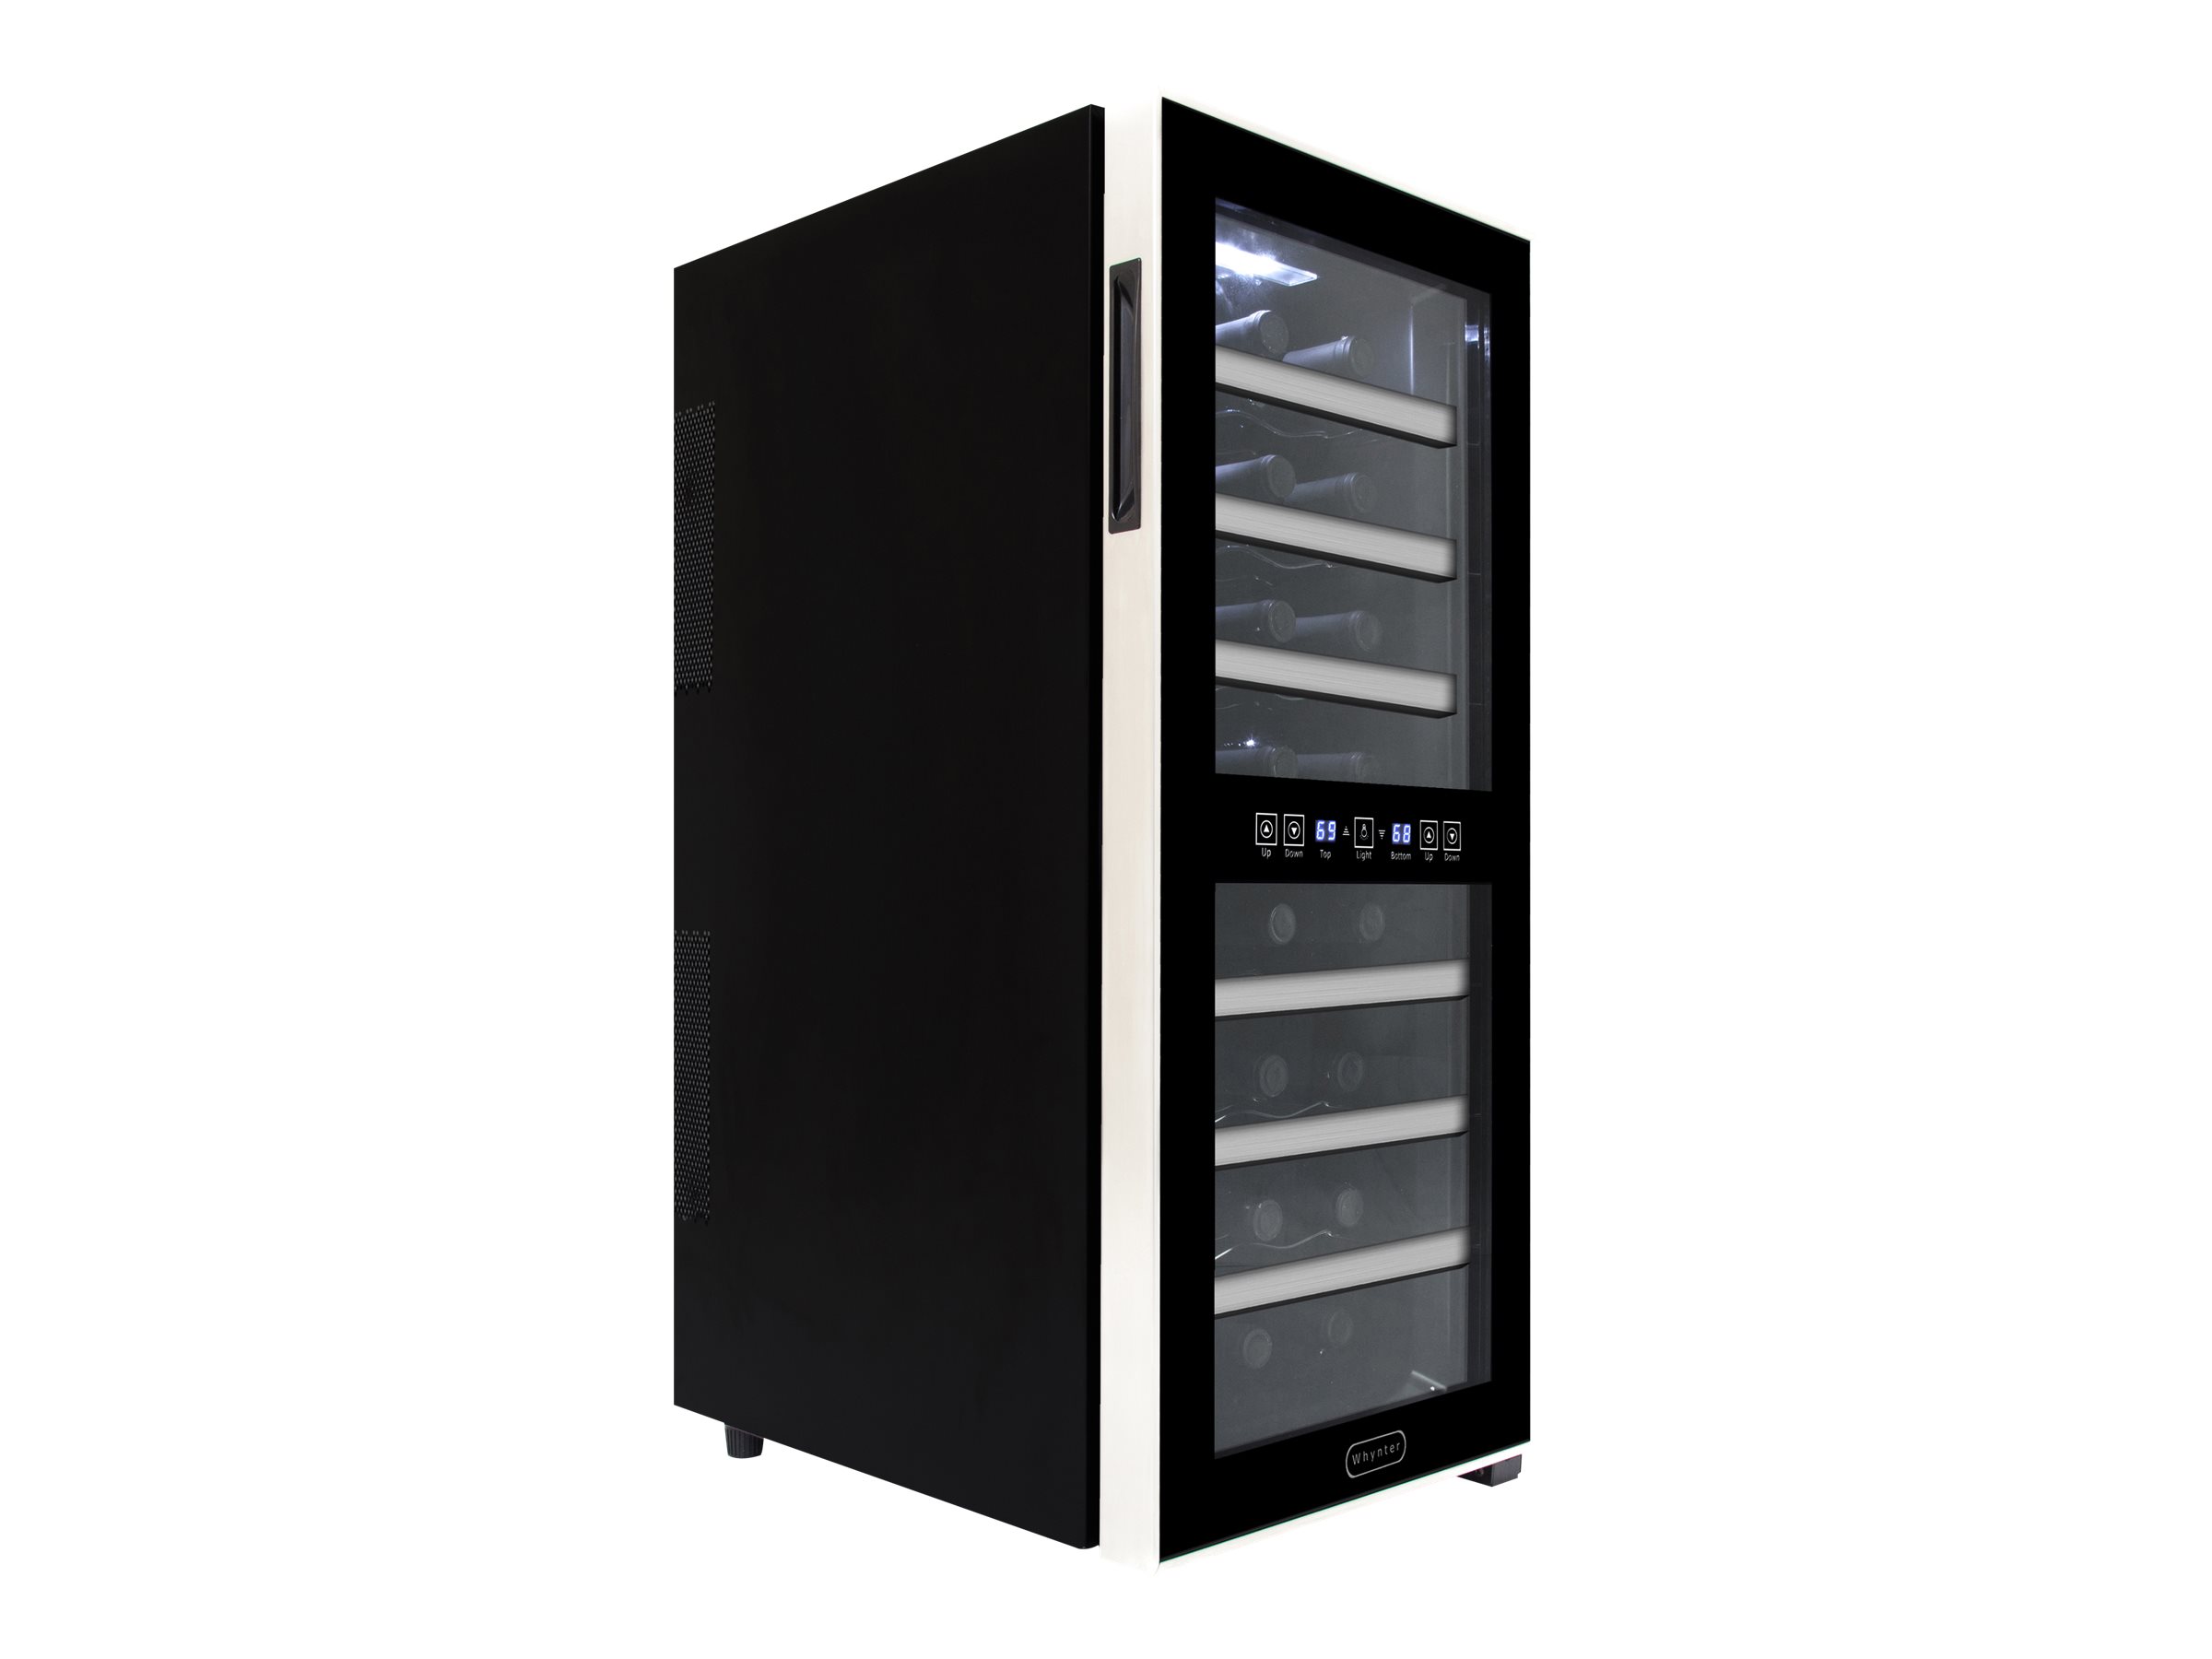 Whynter WC-241DS - Wine cooler - width: 14 in - depth: 20.2 in - height: 33.5 in - image 4 of 6